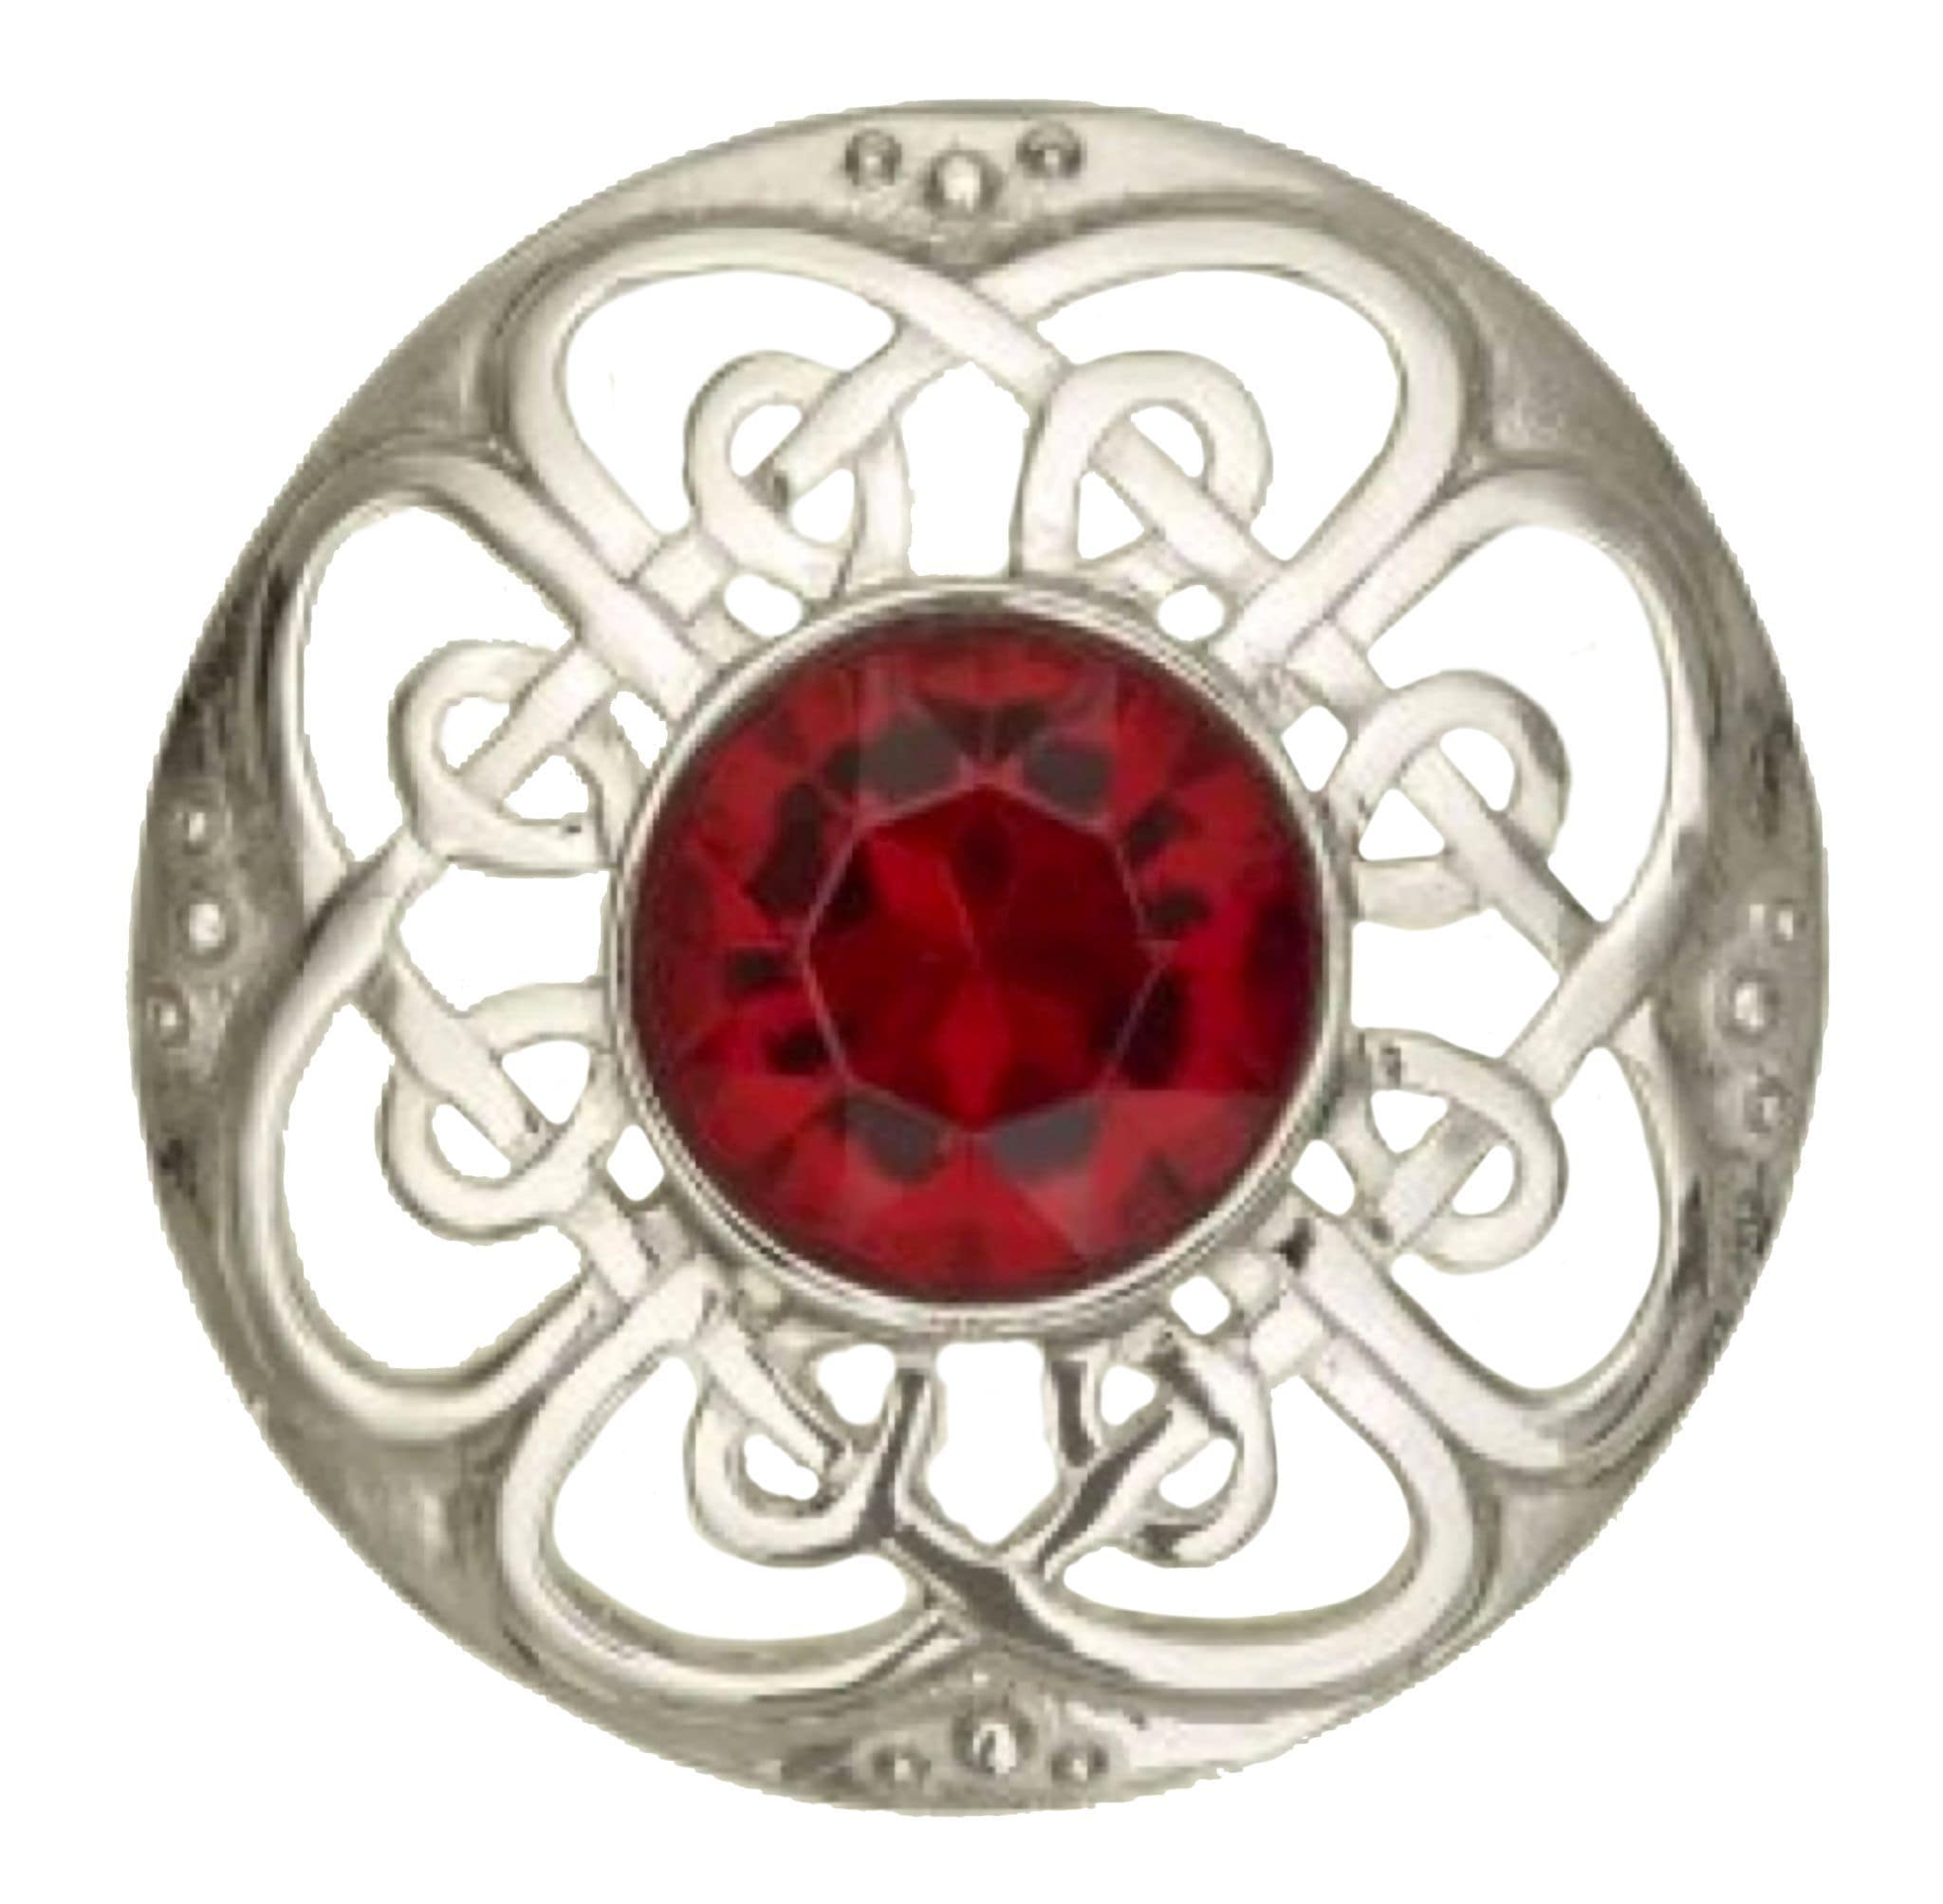 Culloden Plaid Brooch with Stone (184 AP) - MacGregor and MacDuff